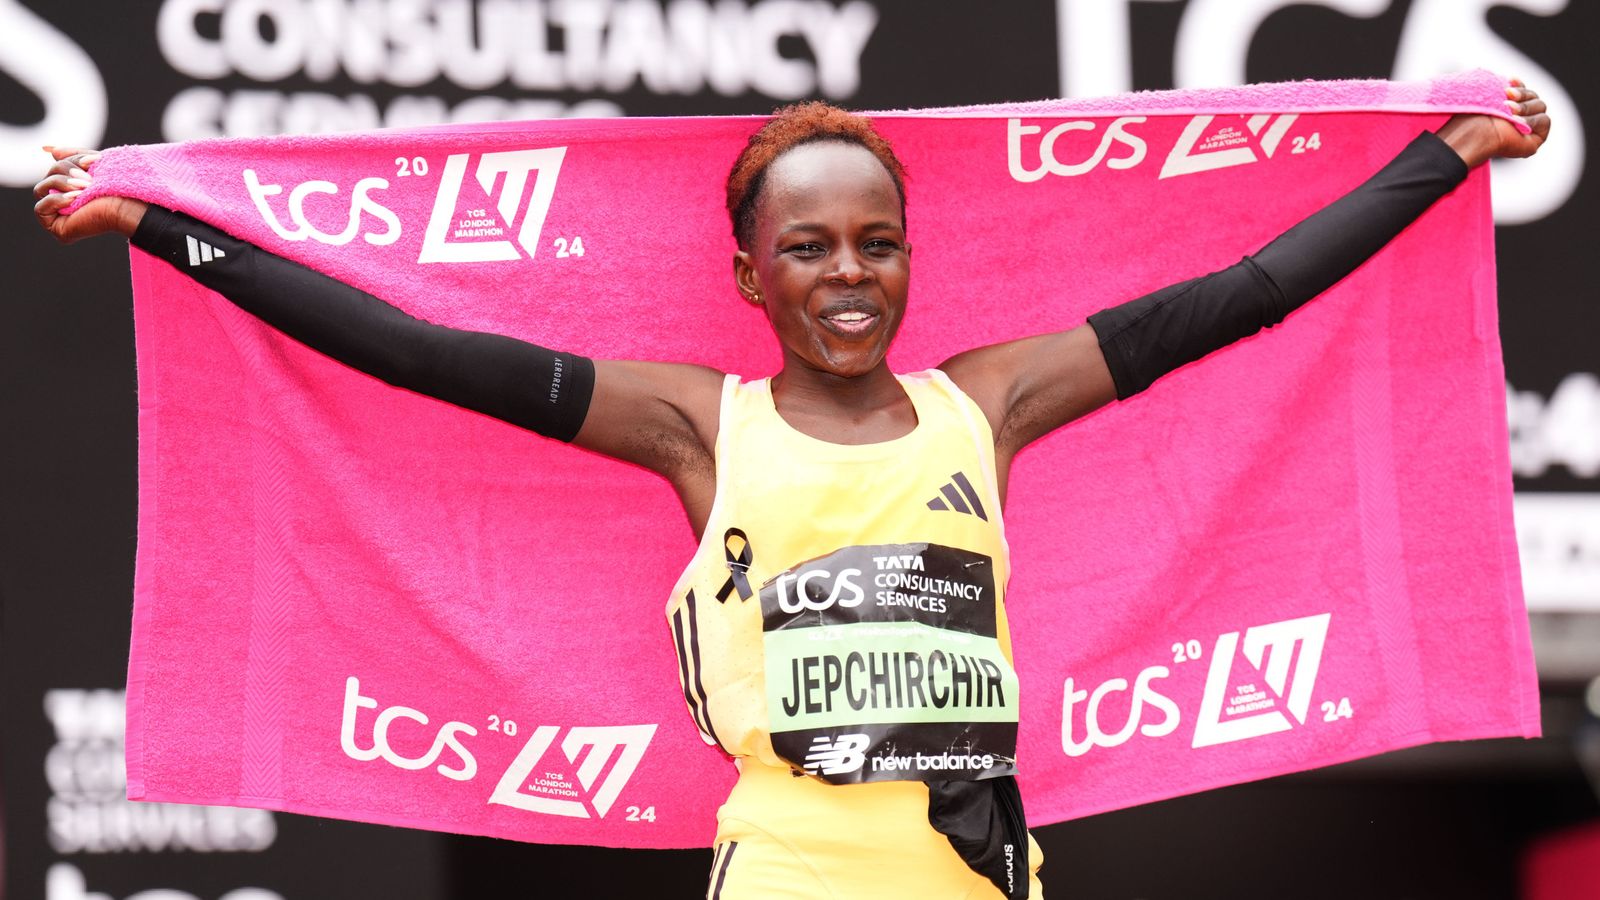 London Marathon: Olympic champion Peres Jepchirchir wins race in women-only world record |  News from athletics